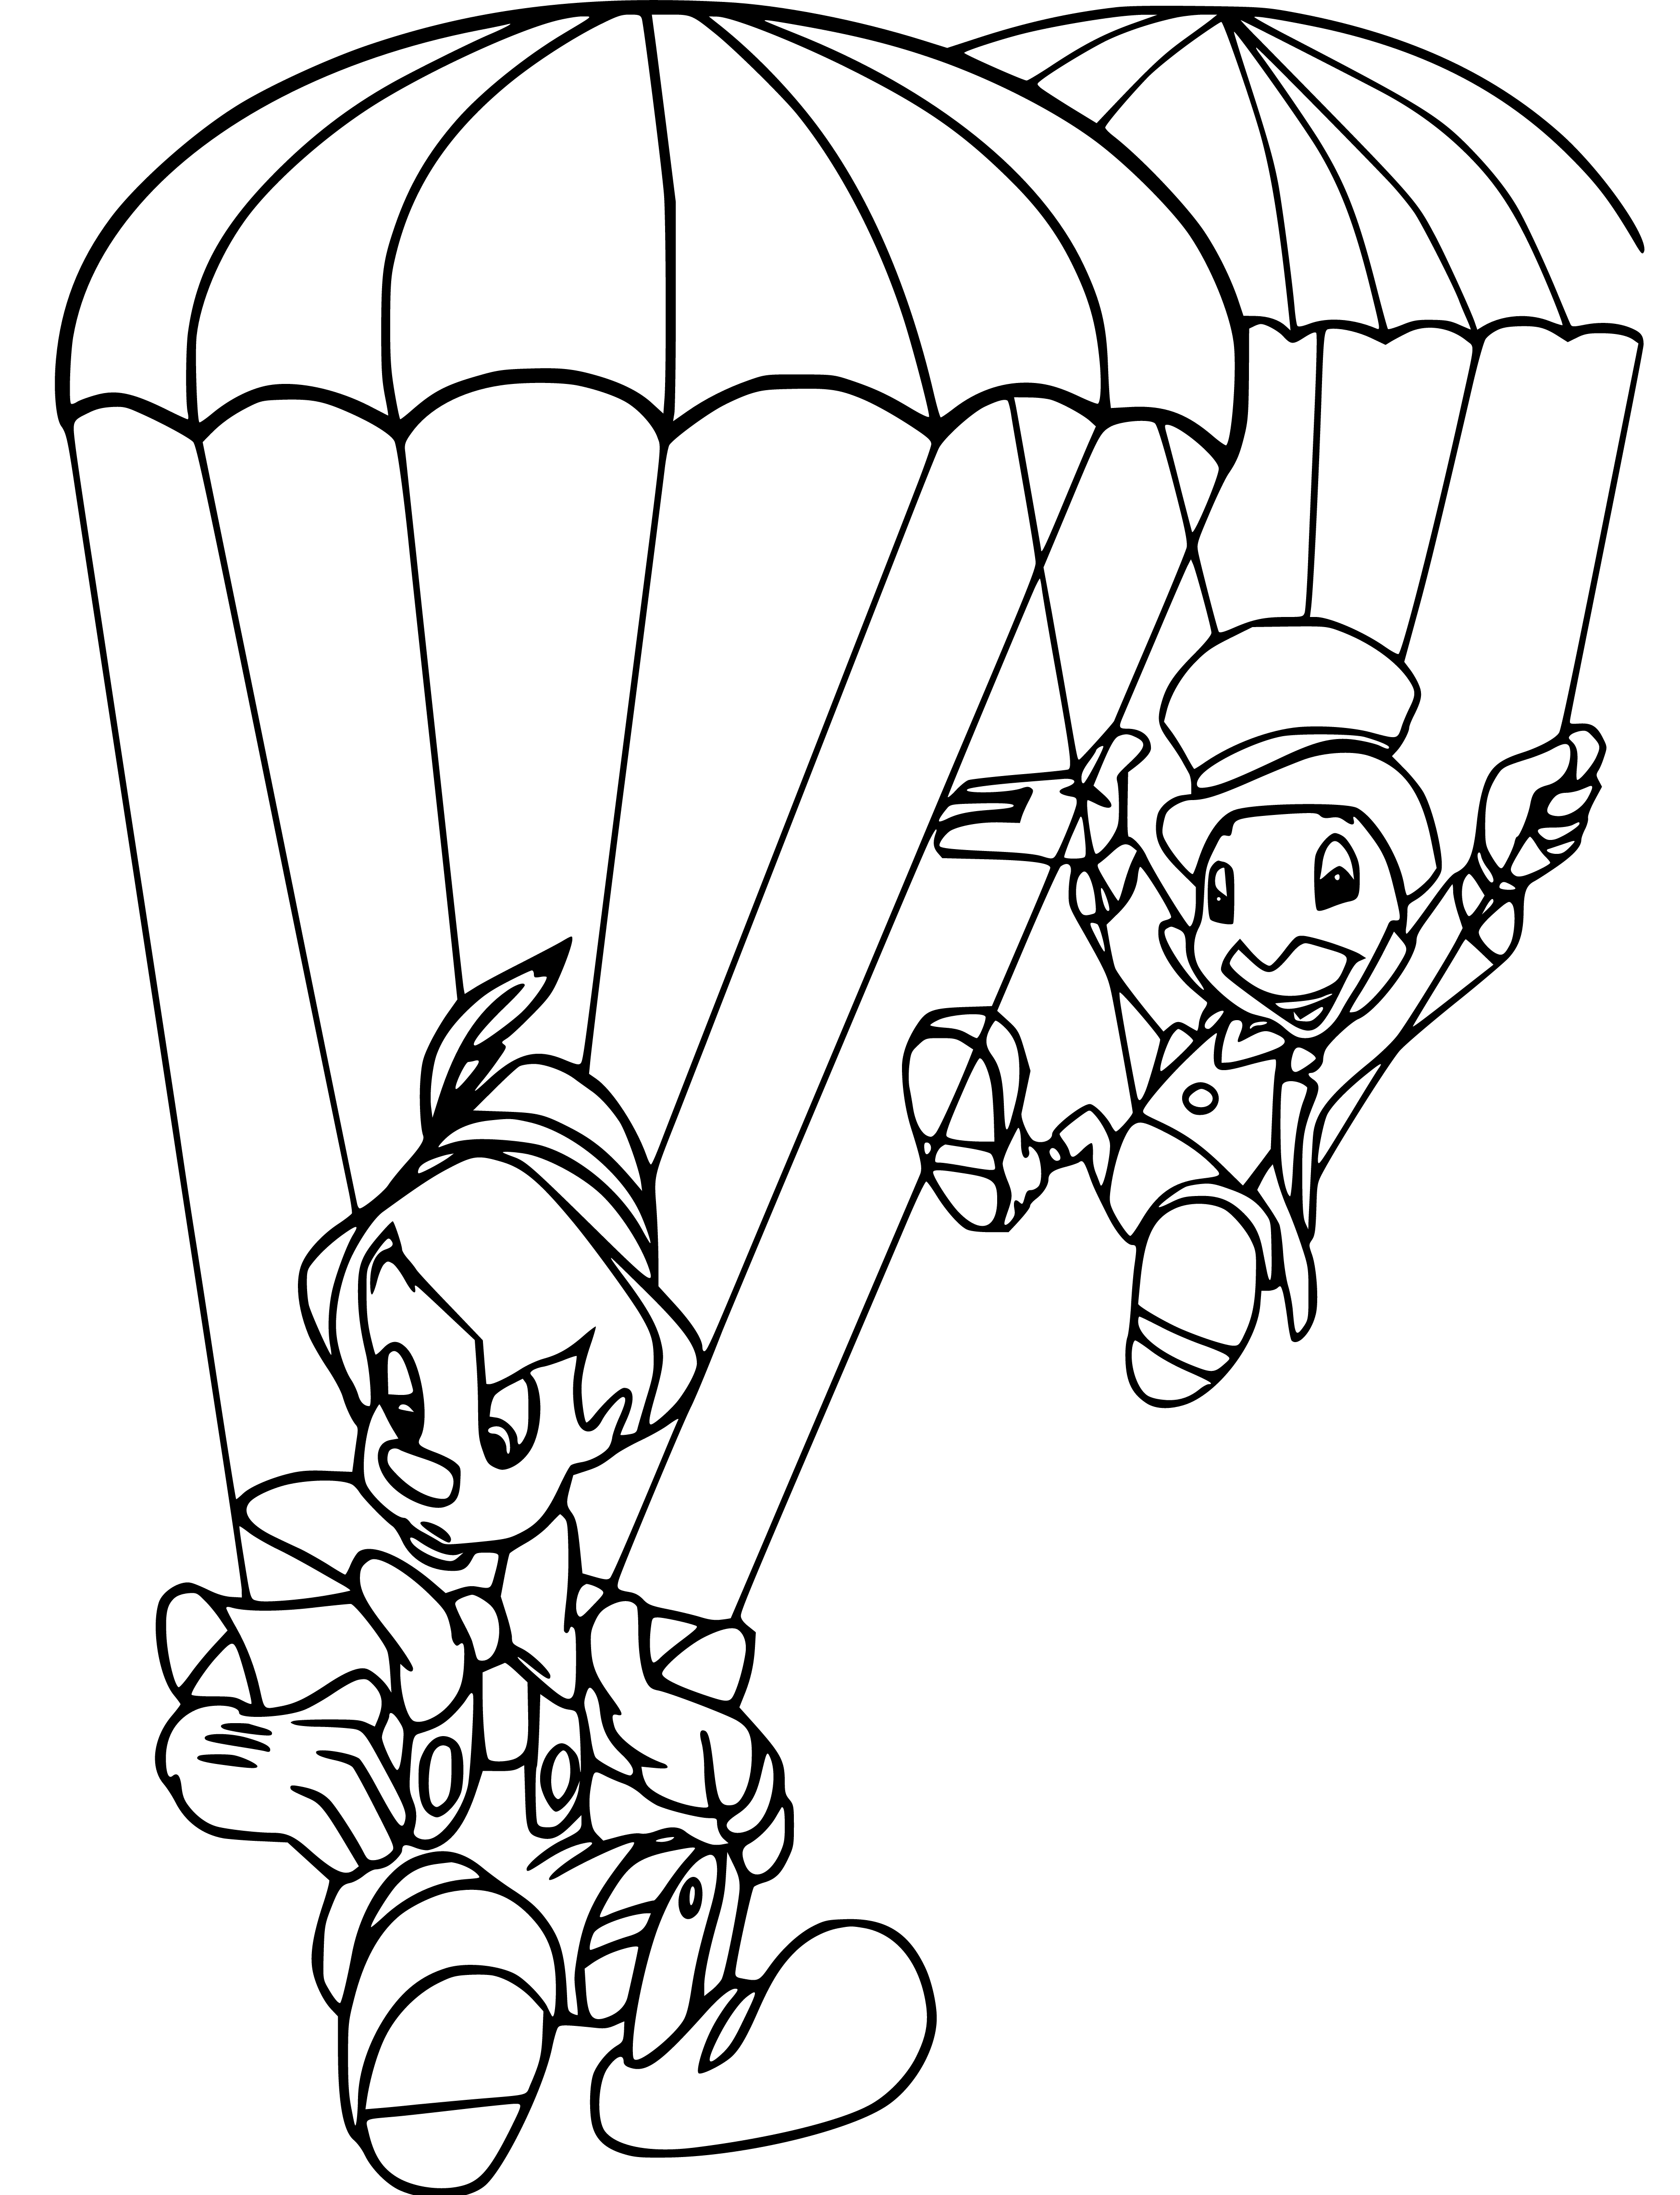 Pinocchio and Jiminy Coloring Page for Children - SheetalColor.com